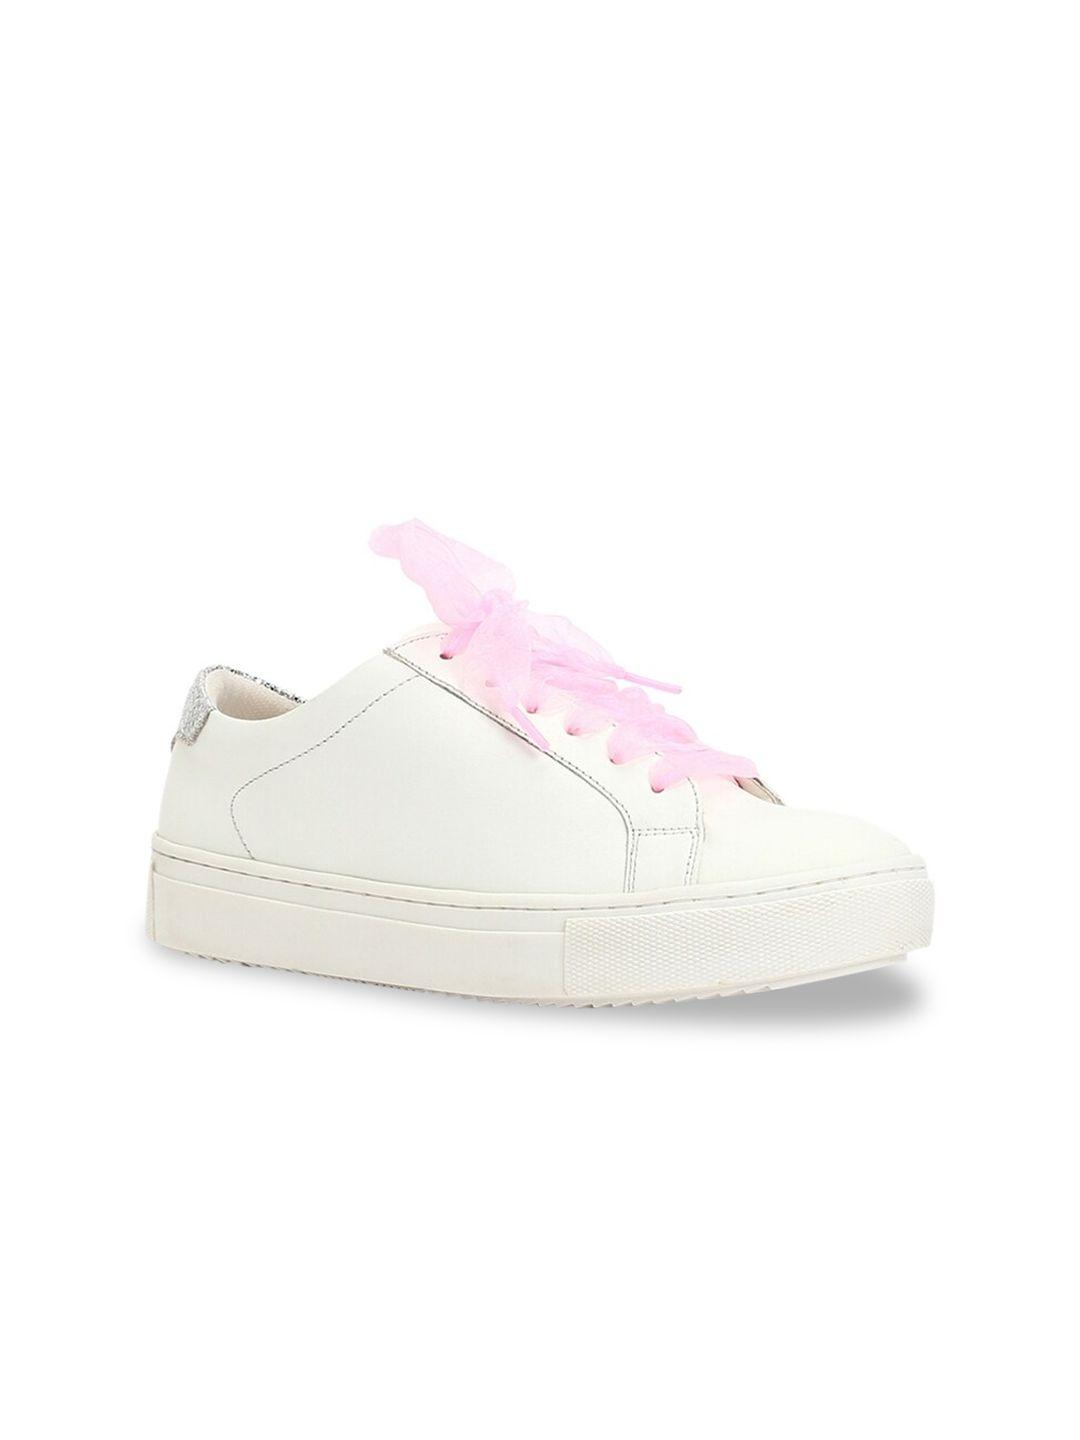 forever 21 women white solid sneakers